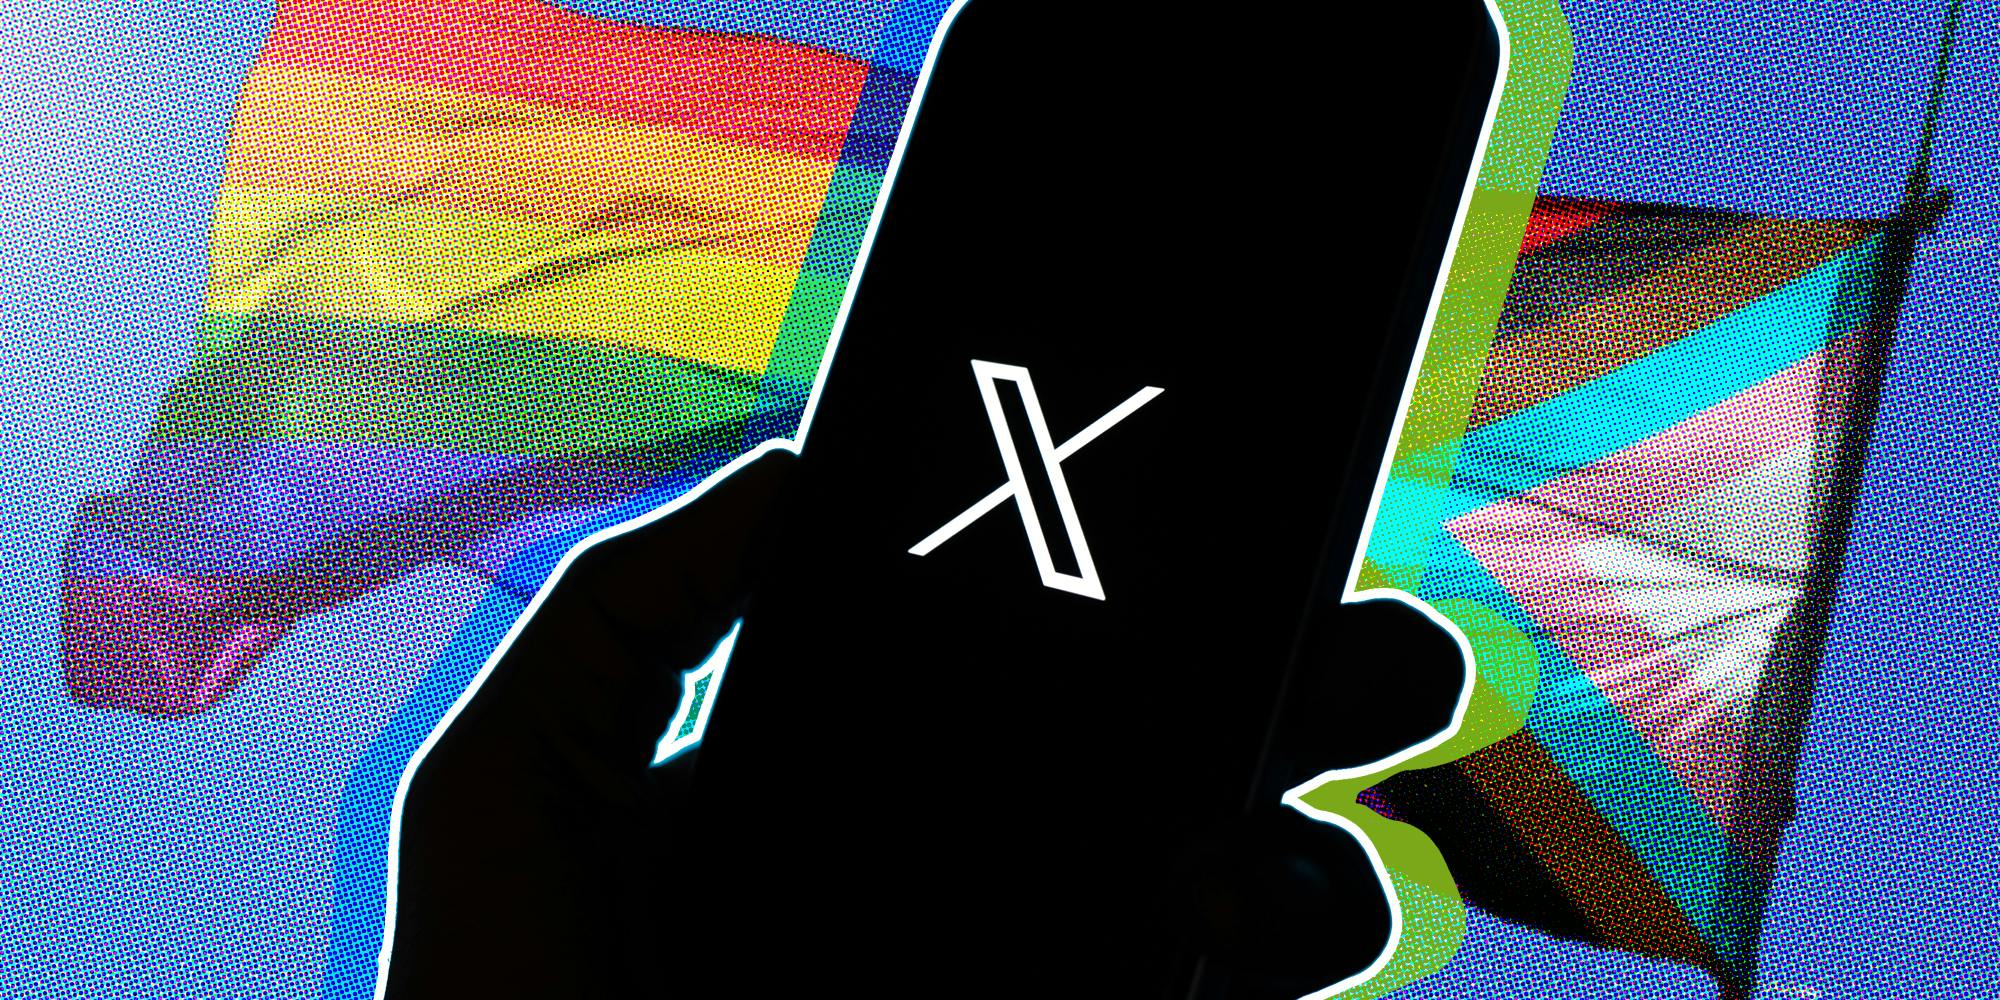 Hand holding phone with x app above an lgbtq flag